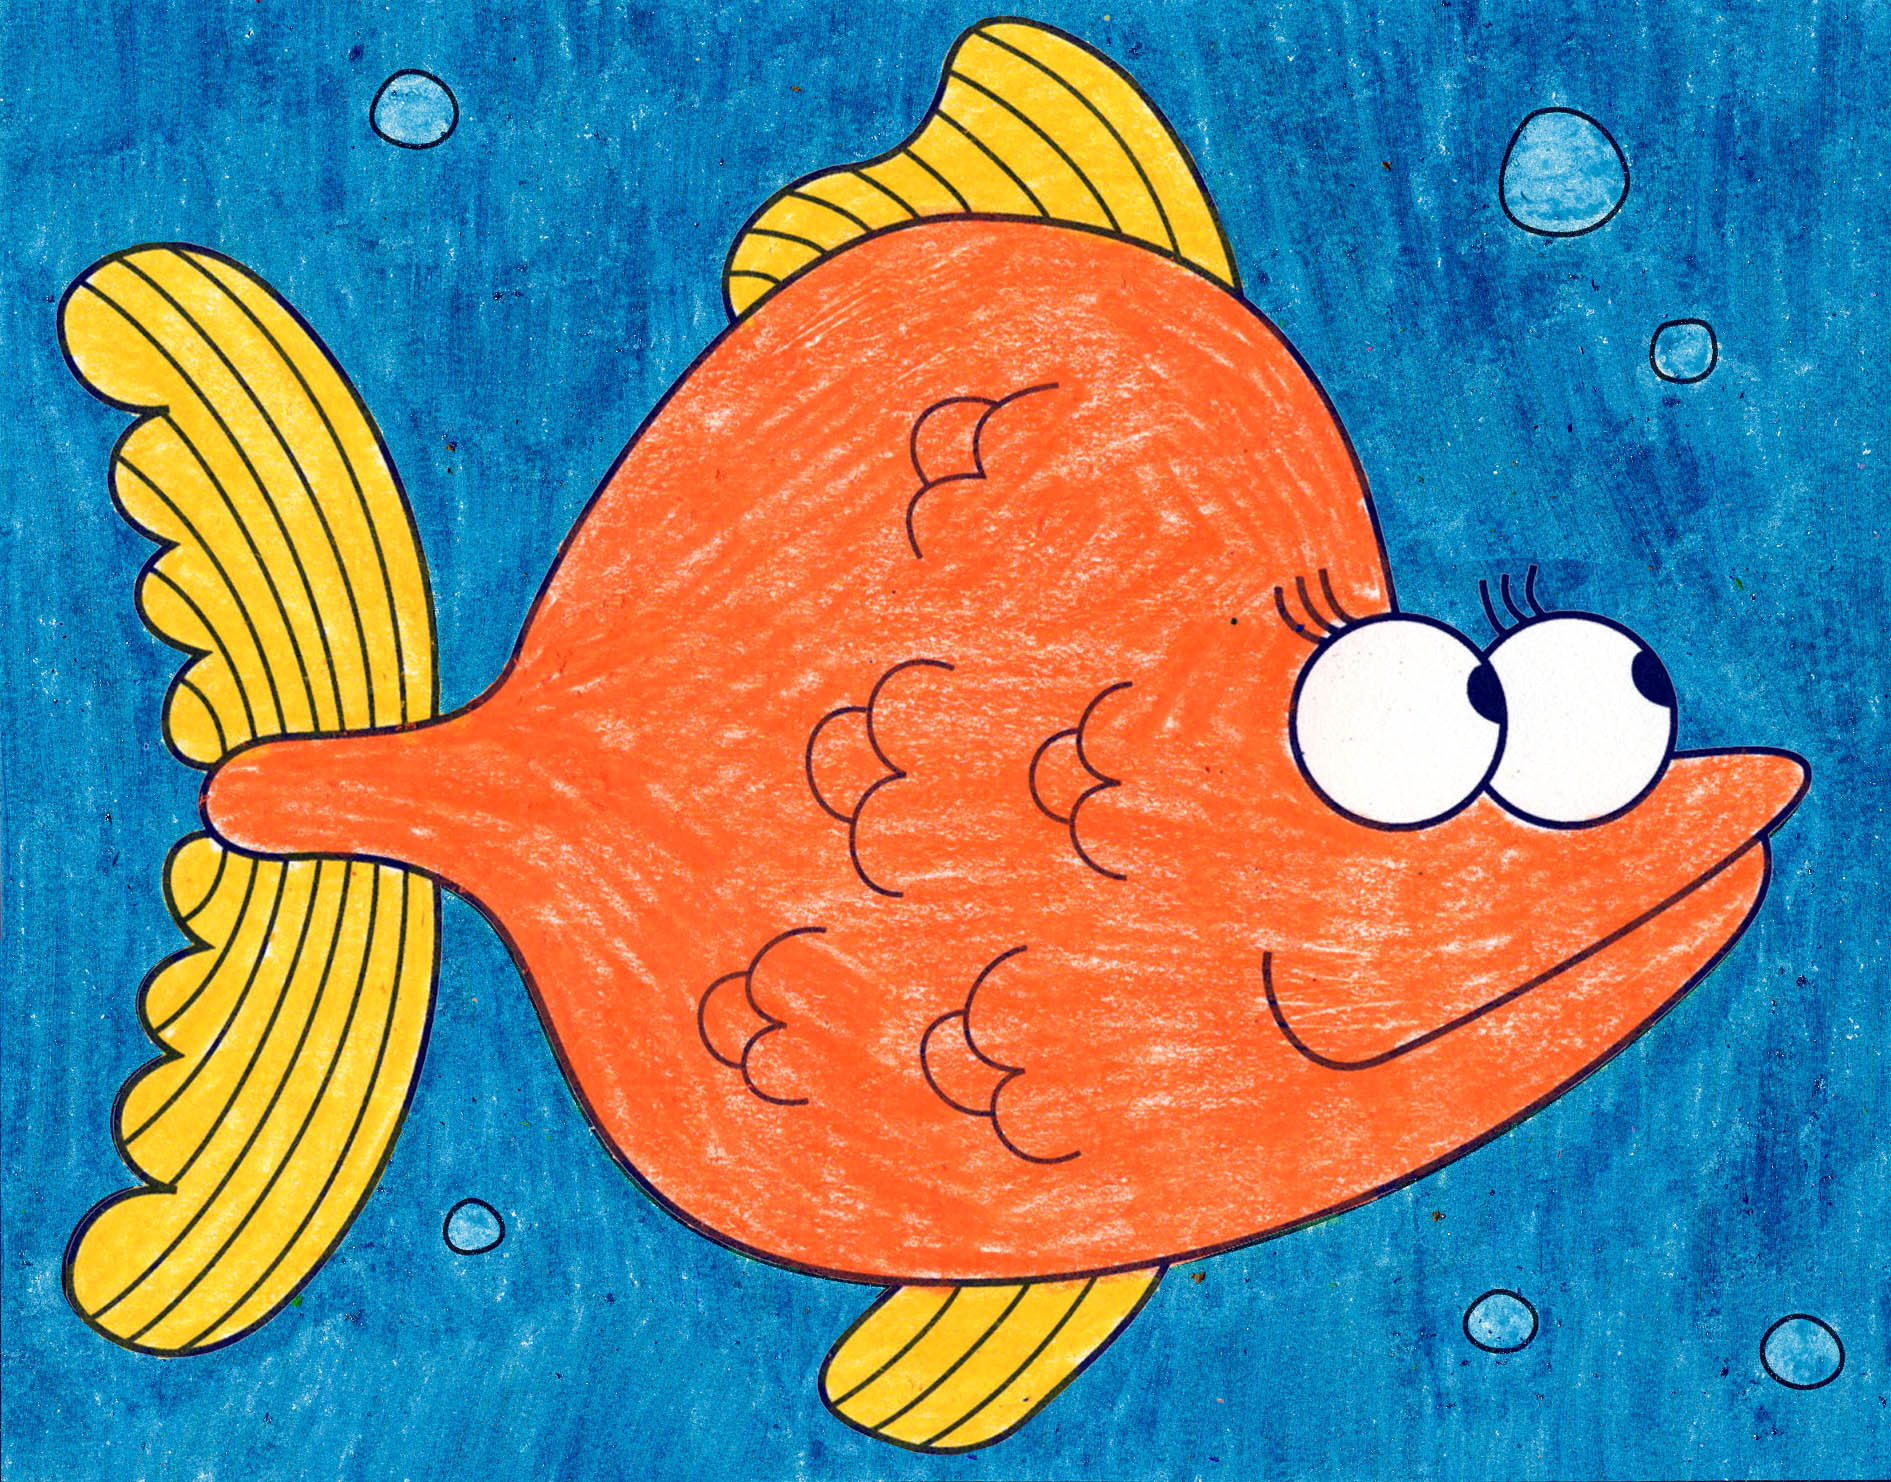 Fish Drawing - Gallery and How to Draw Videos!